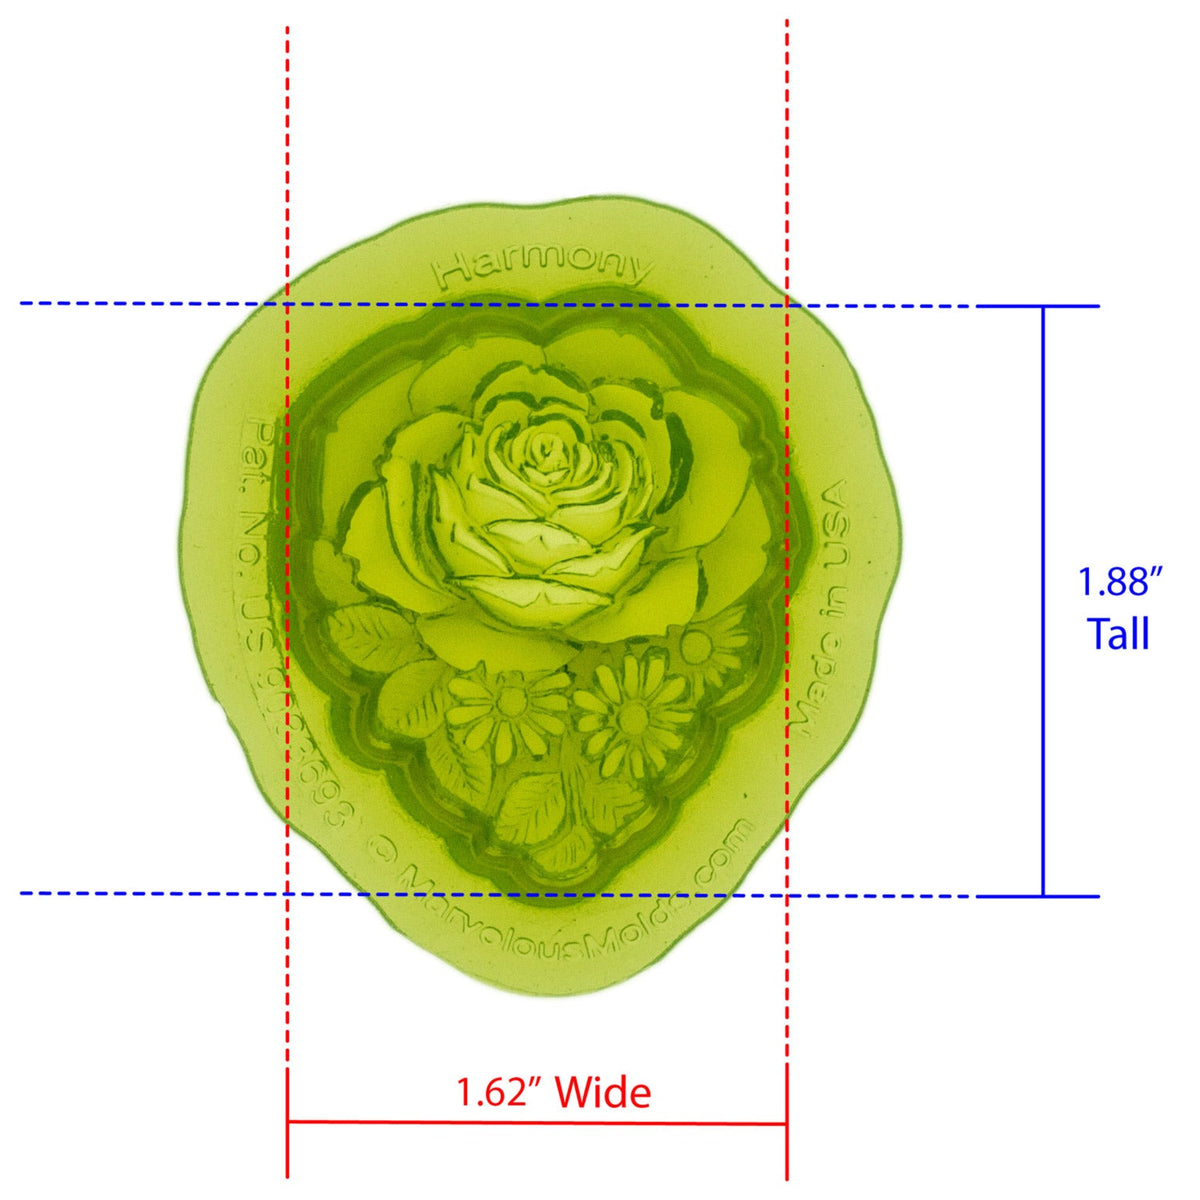 Harmony Rose Floral Food Safe Silicone Mold Cavity Measures 1.62 inches Wide by 1.88 inches Tall, proudly Made in USA